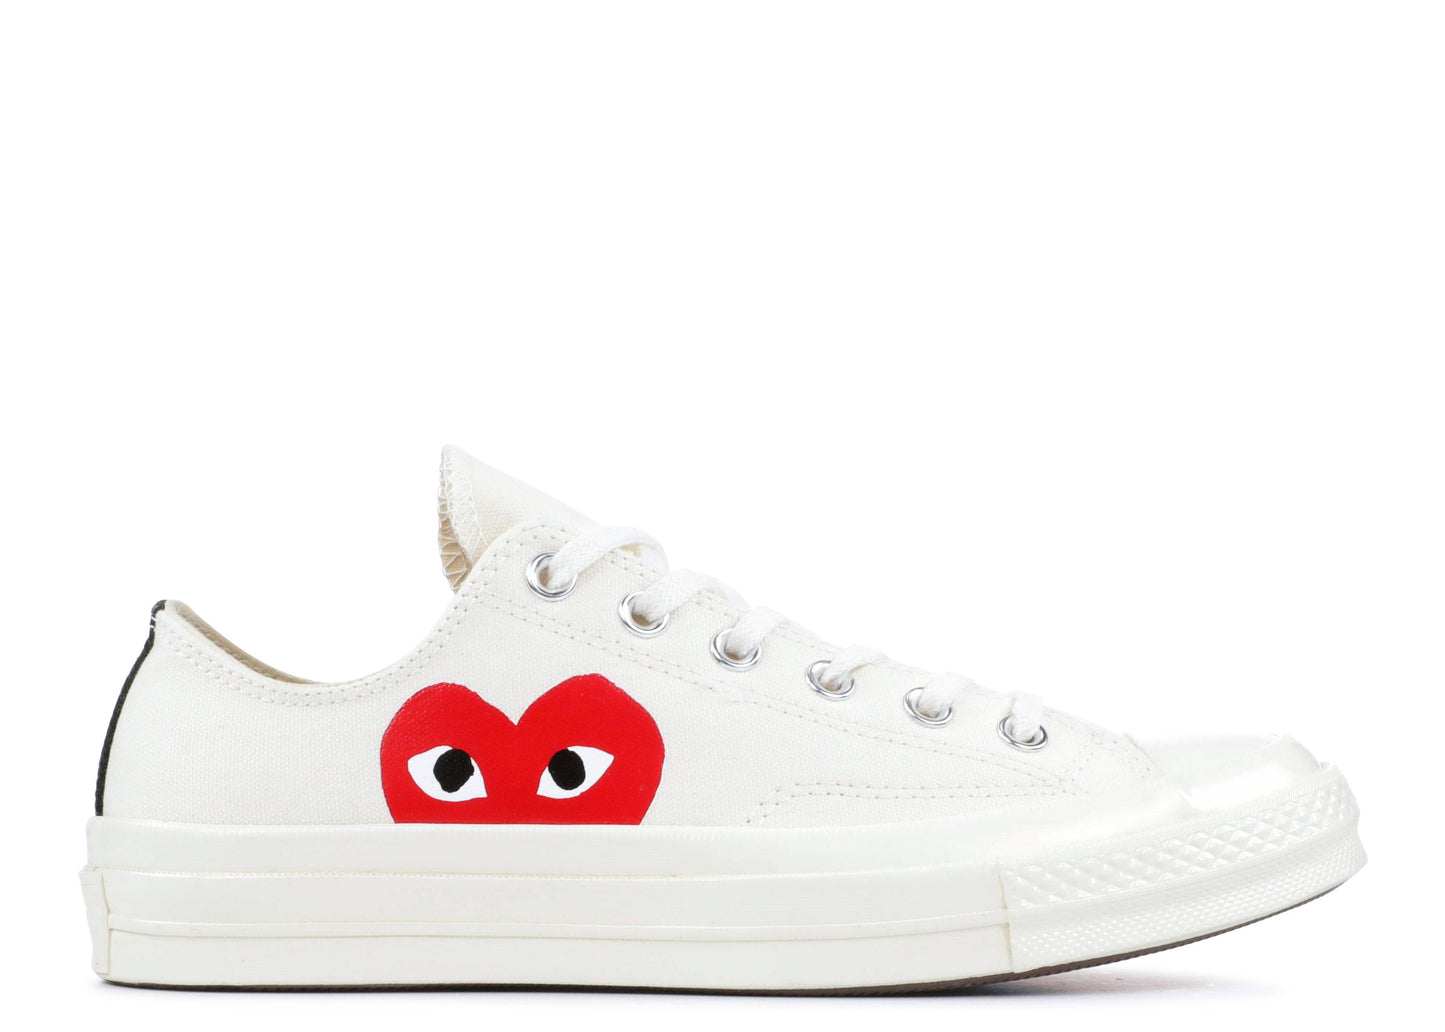 Converse X CDG Play Chuck Taylor All-Star 70 Ox White